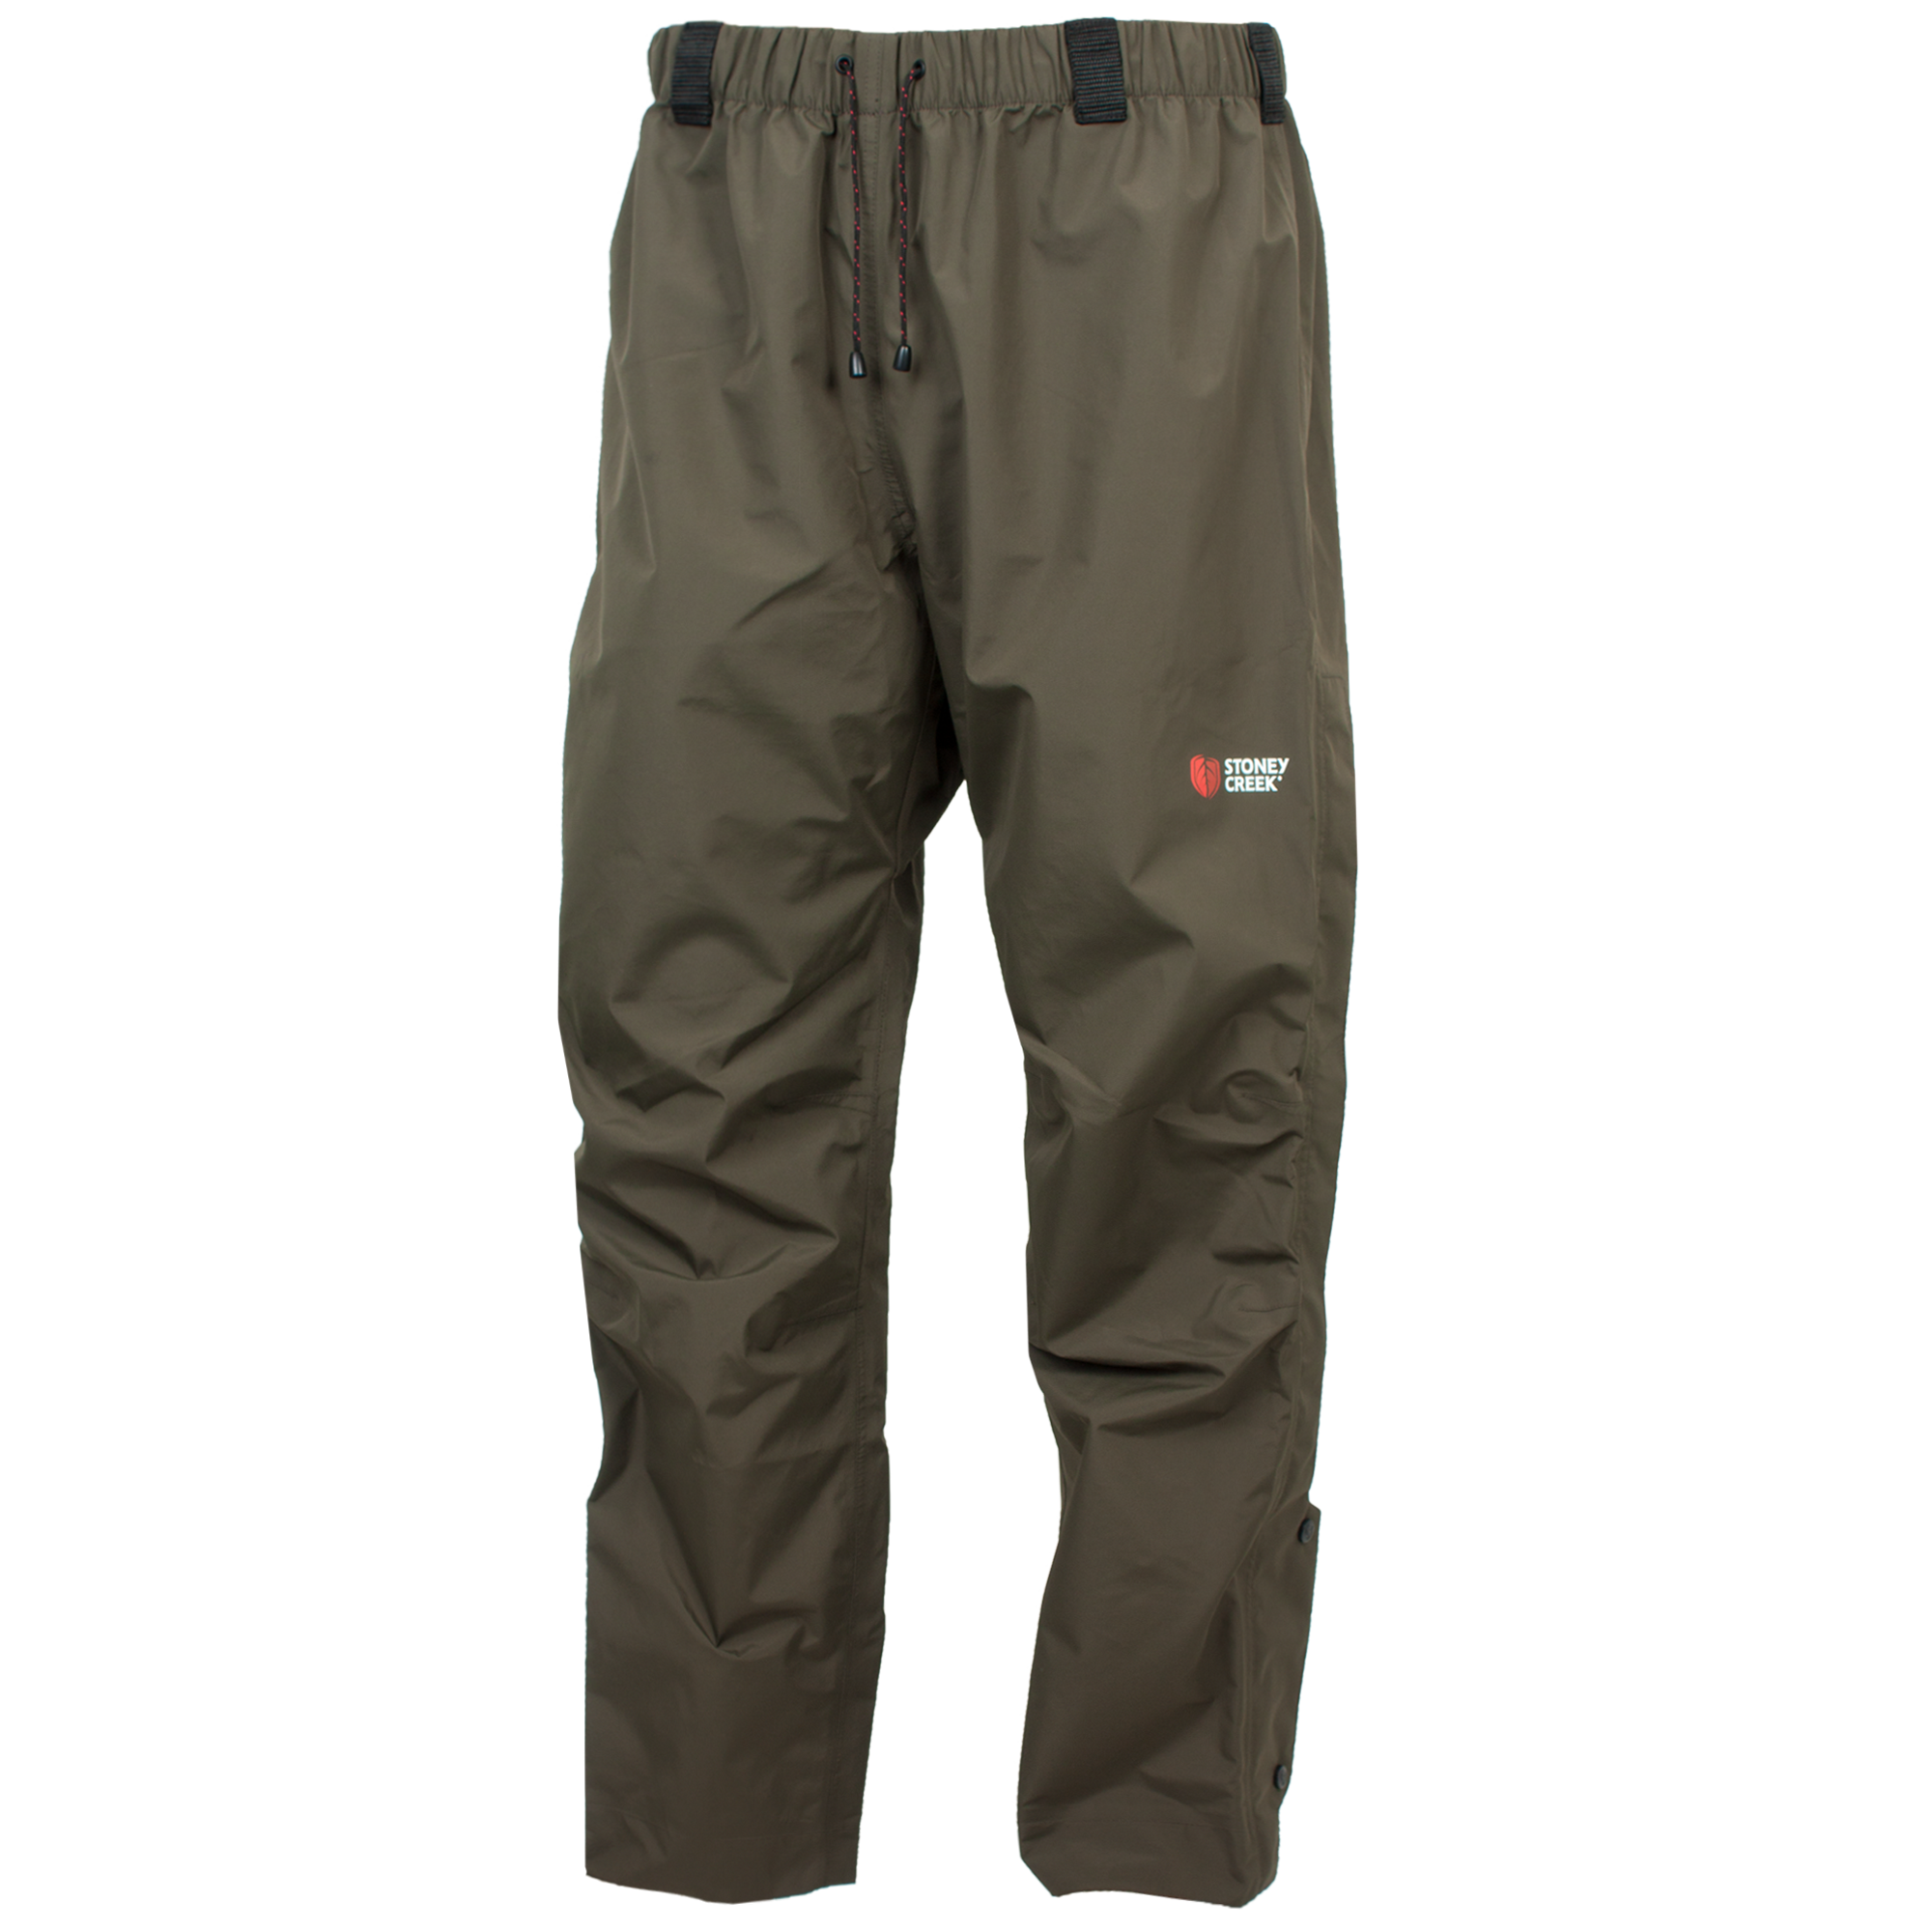 Stoney Creek Mens Dreambull Overtrouser - S / GUMLEAF - Mansfield Hunting & Fishing - Products to prepare for Corona Virus